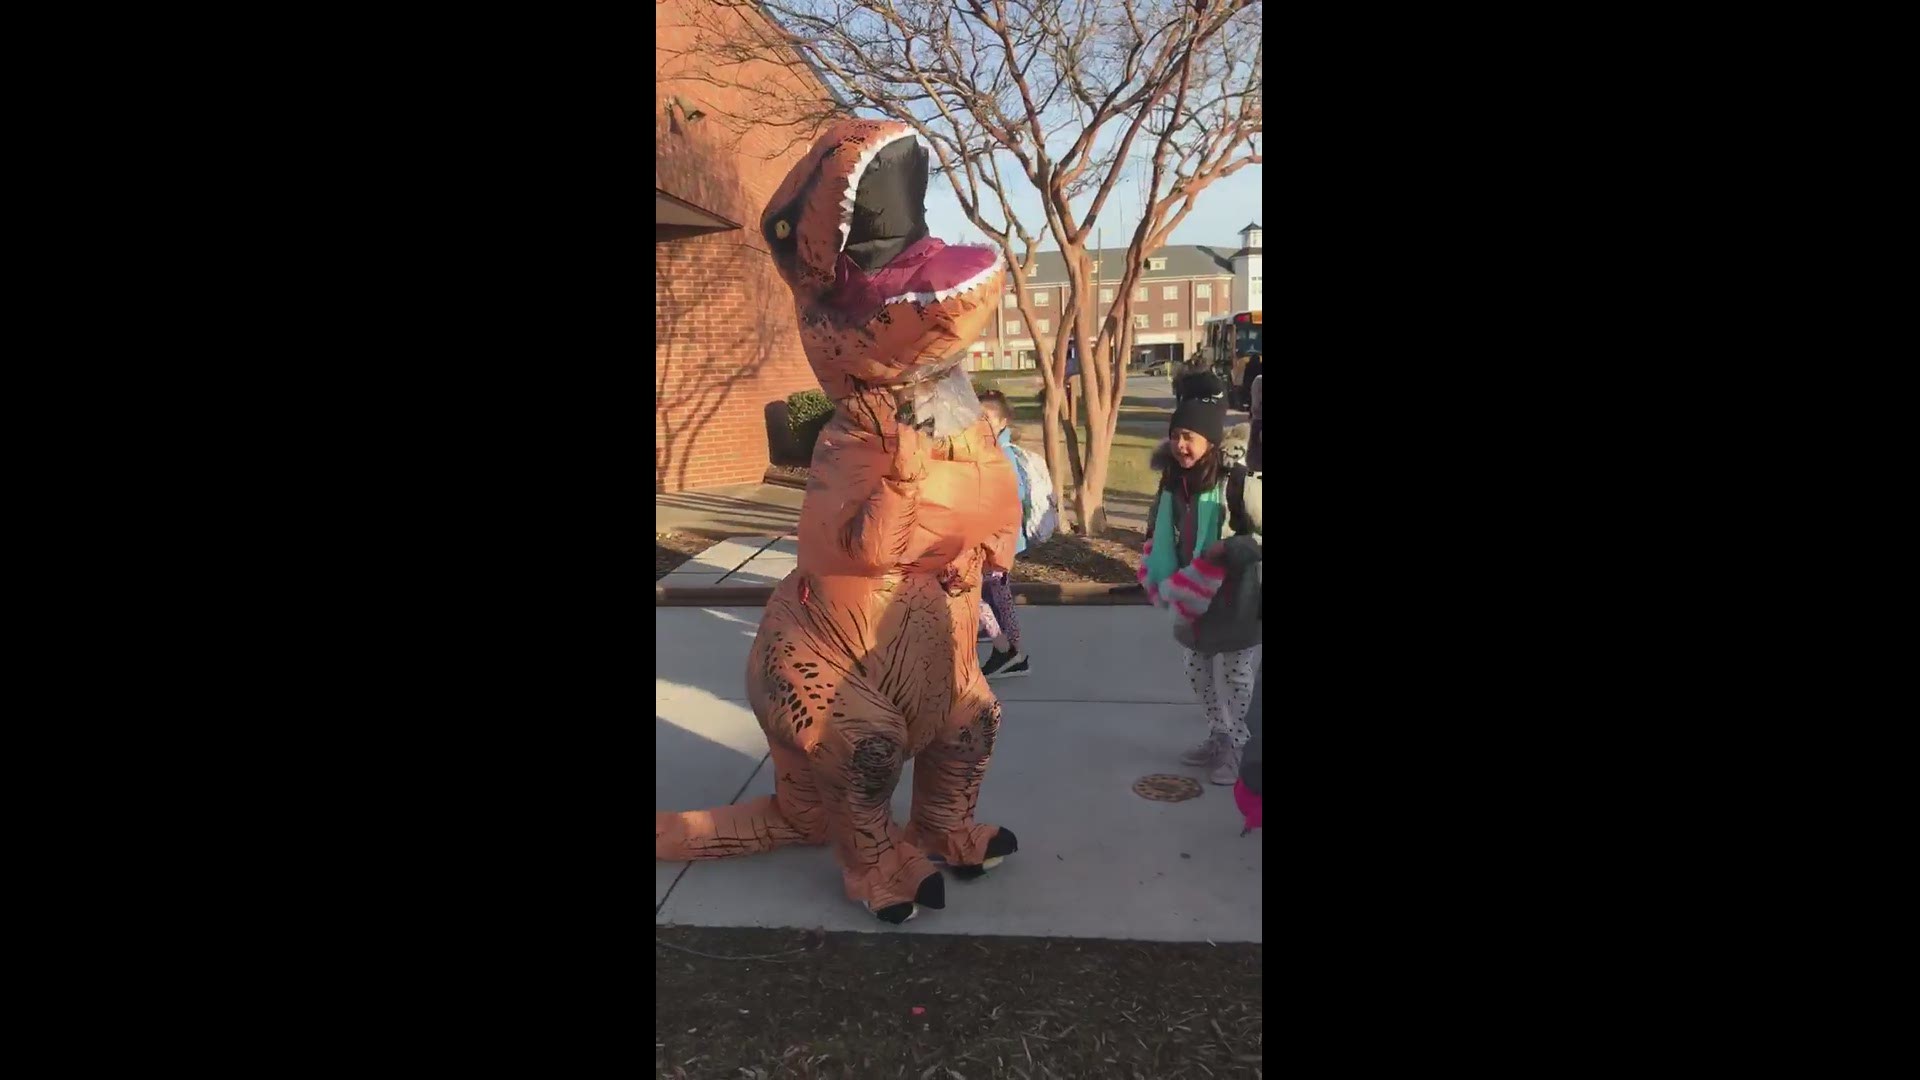 Centerville Elementary School parent Meg Glomski shared video of a T-Rex greeting children outside the school in Virginia Beach. The PTA's book fair has a dinosaur theme, and the group thought the T-Rex was a great way to get students excited about reading!